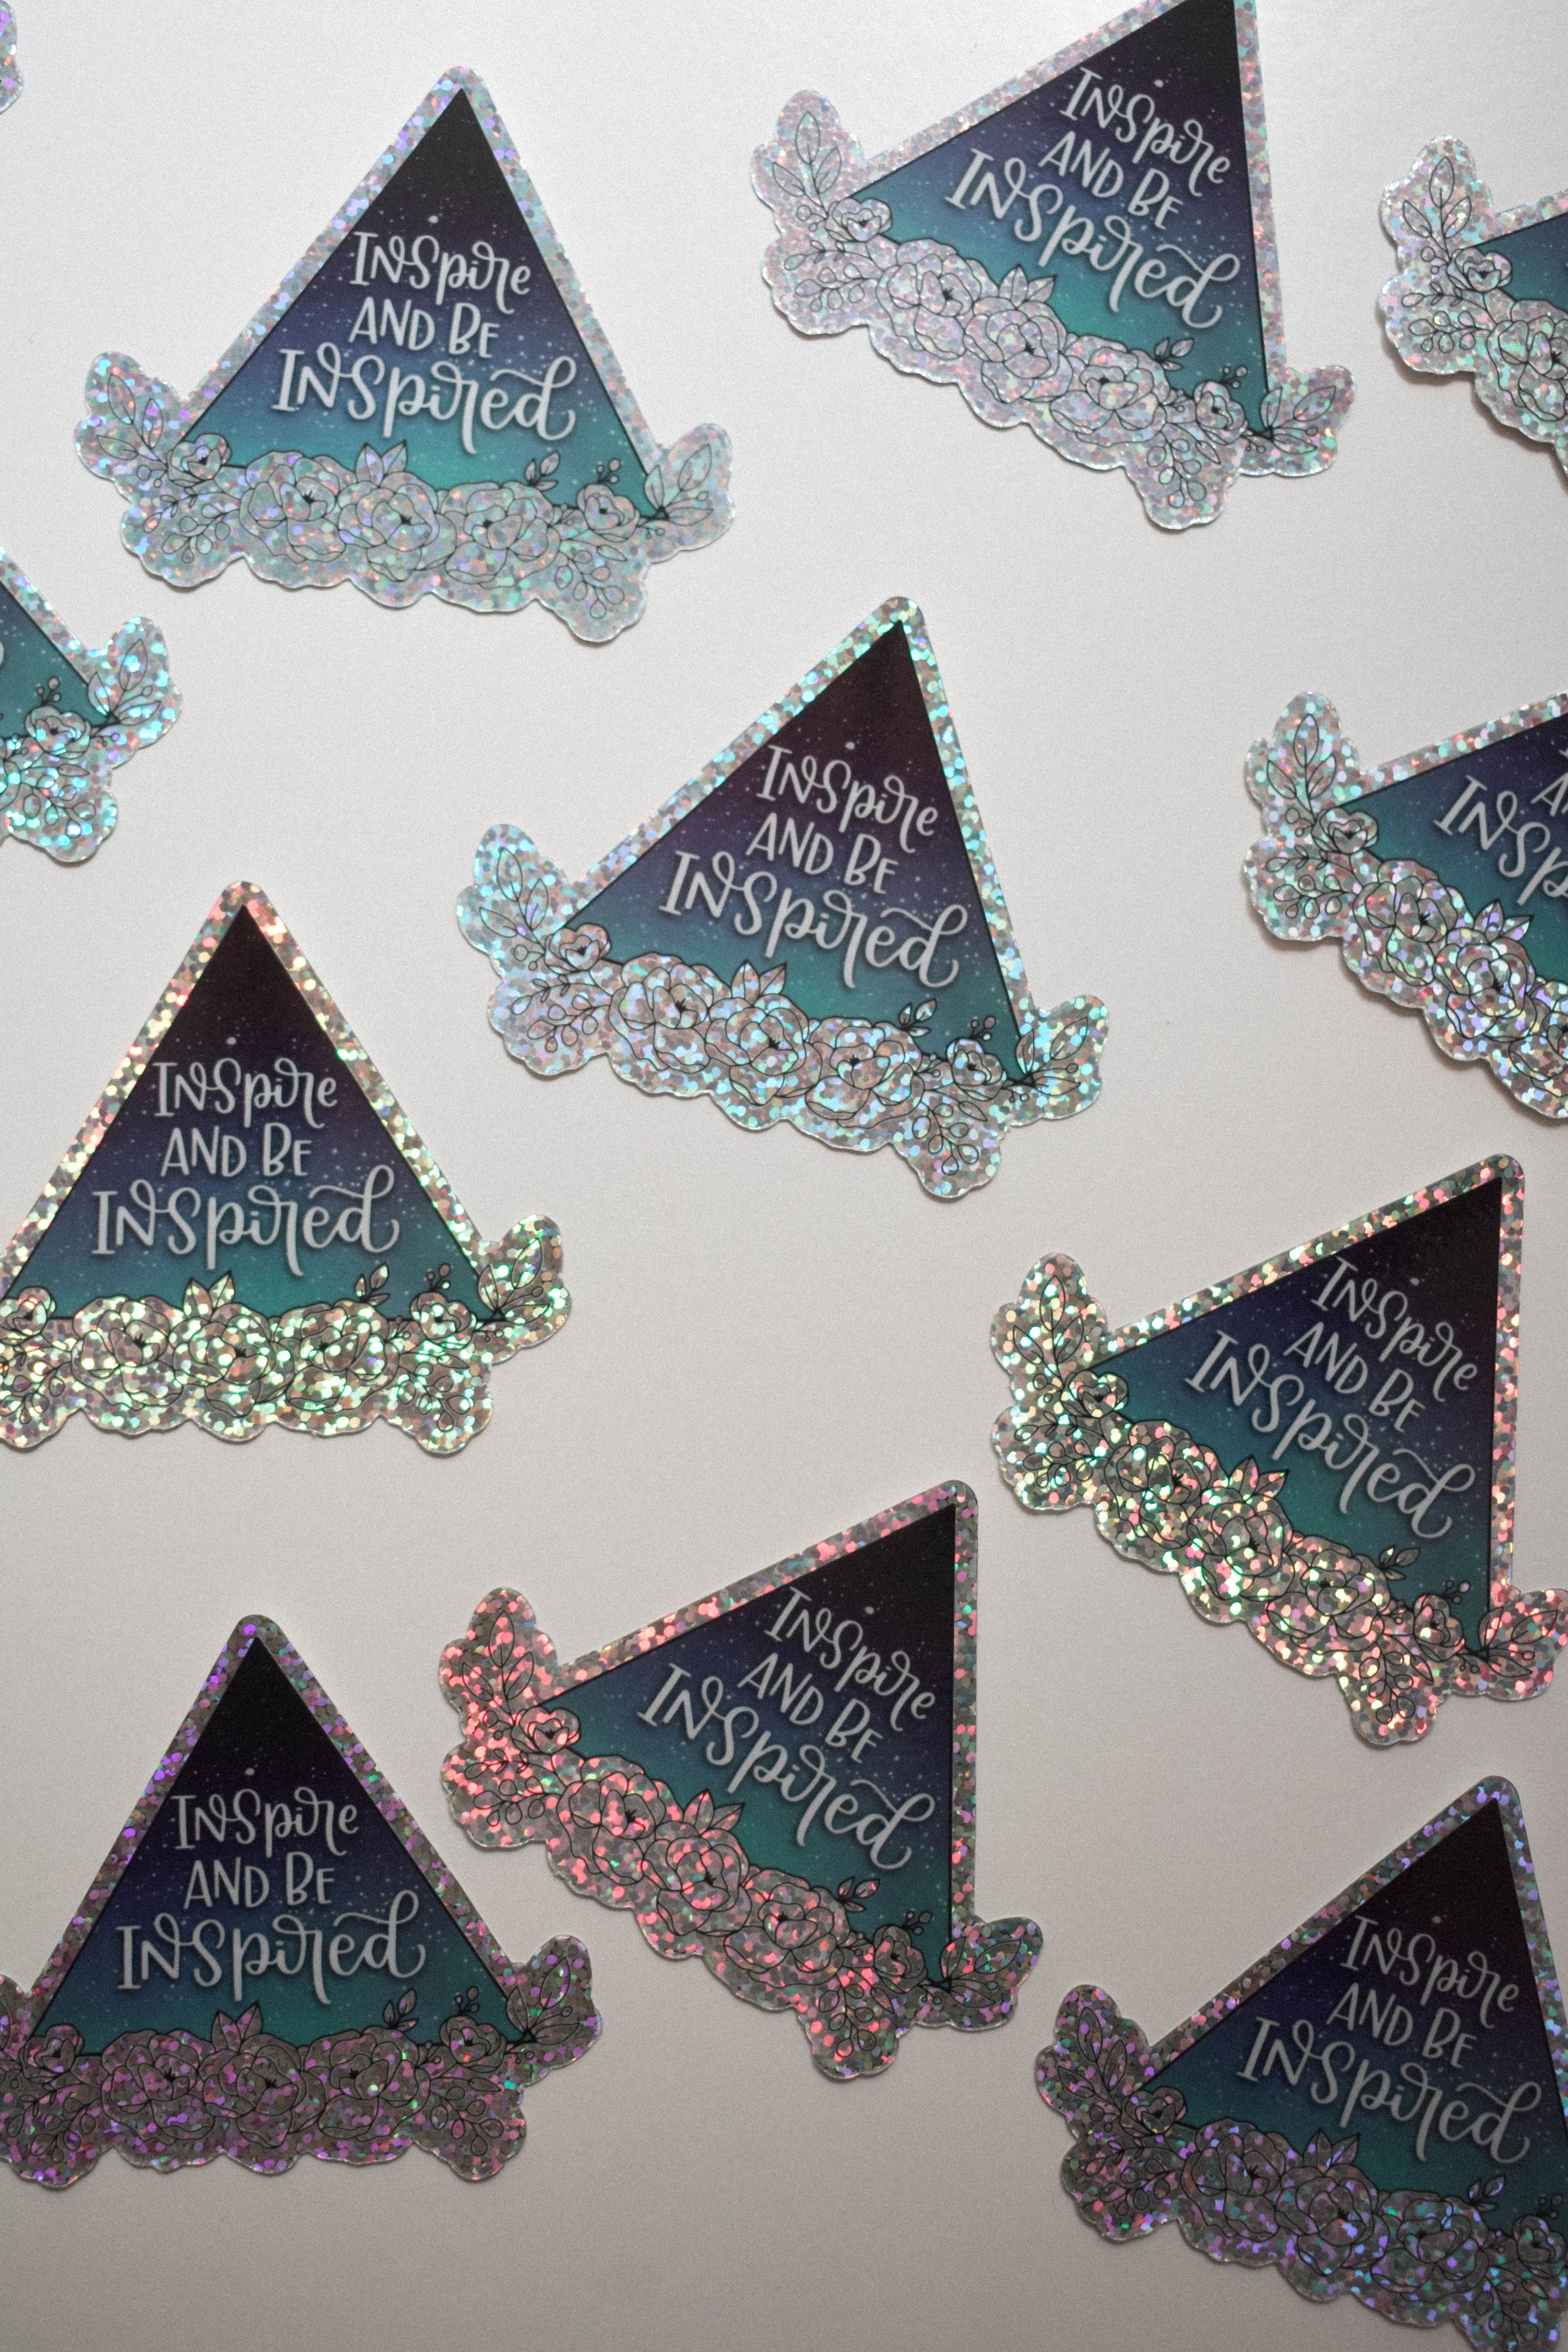 Glitter Vinyl Stickers / Inspired and Be Inspired